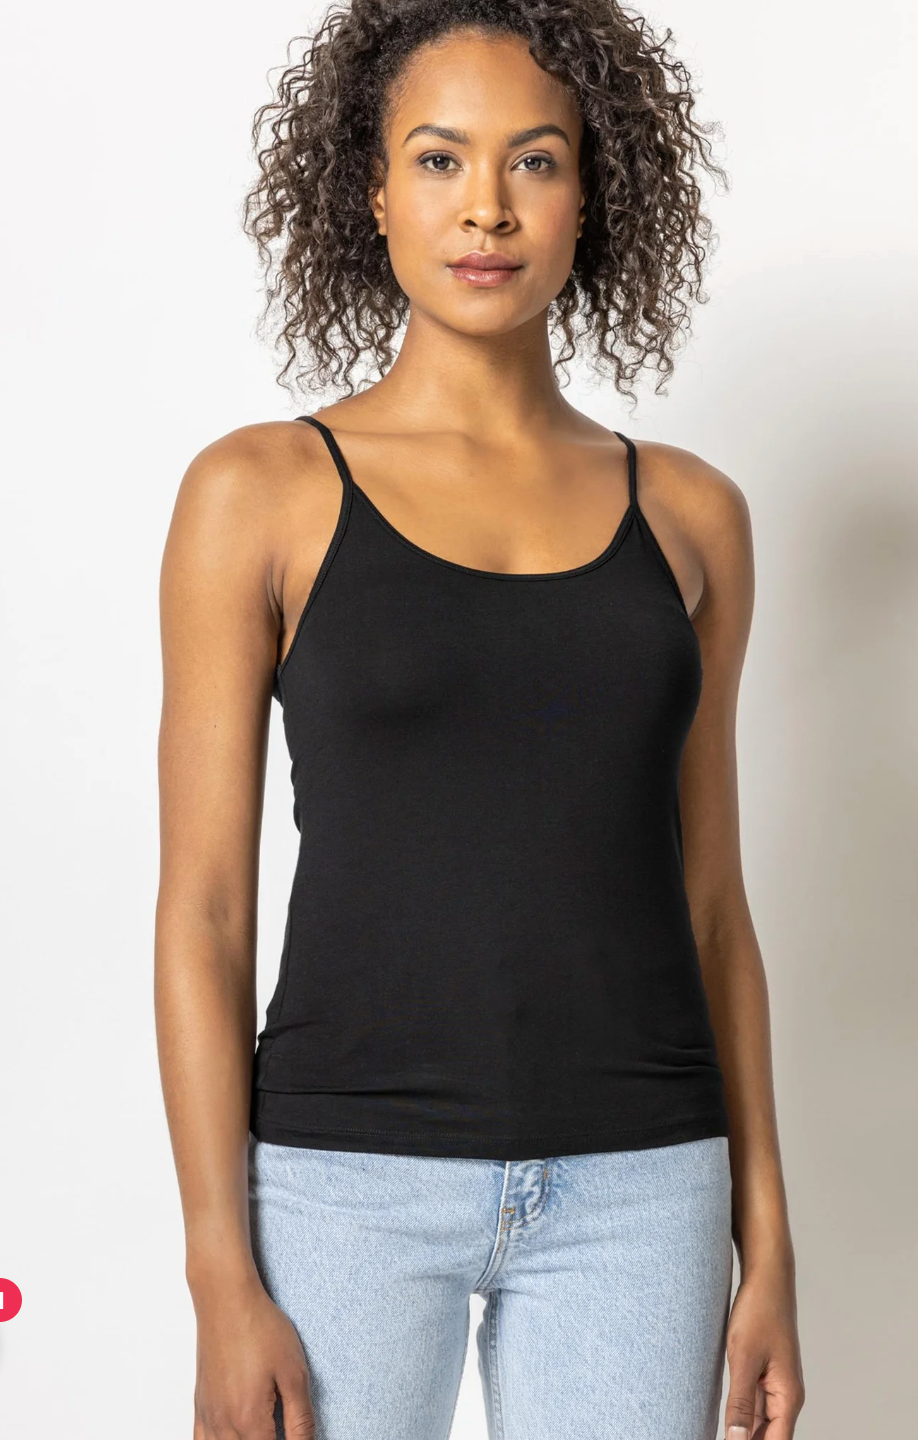 Camisole in Black and Nude